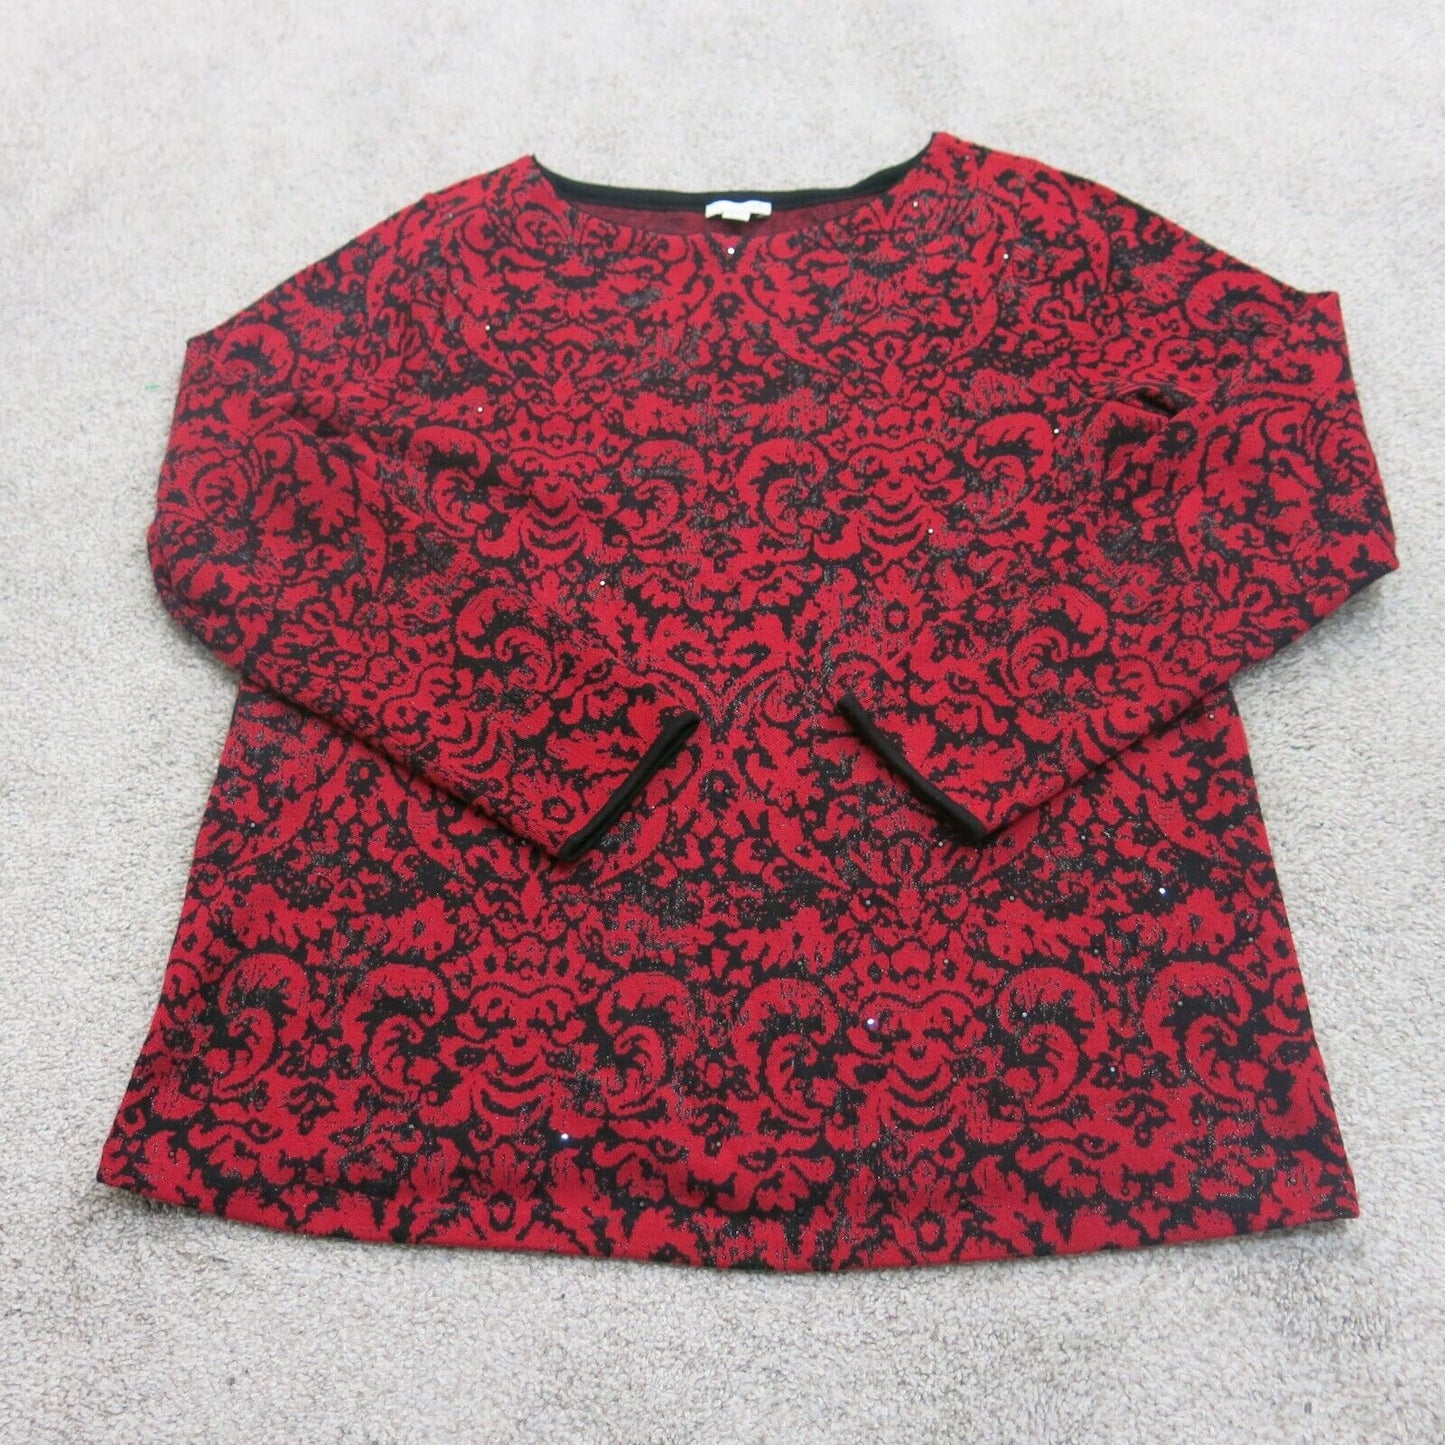 J. Jill Women Pullover Knitted Sweater Floral Long Sleeve Crew Neck Black Red M